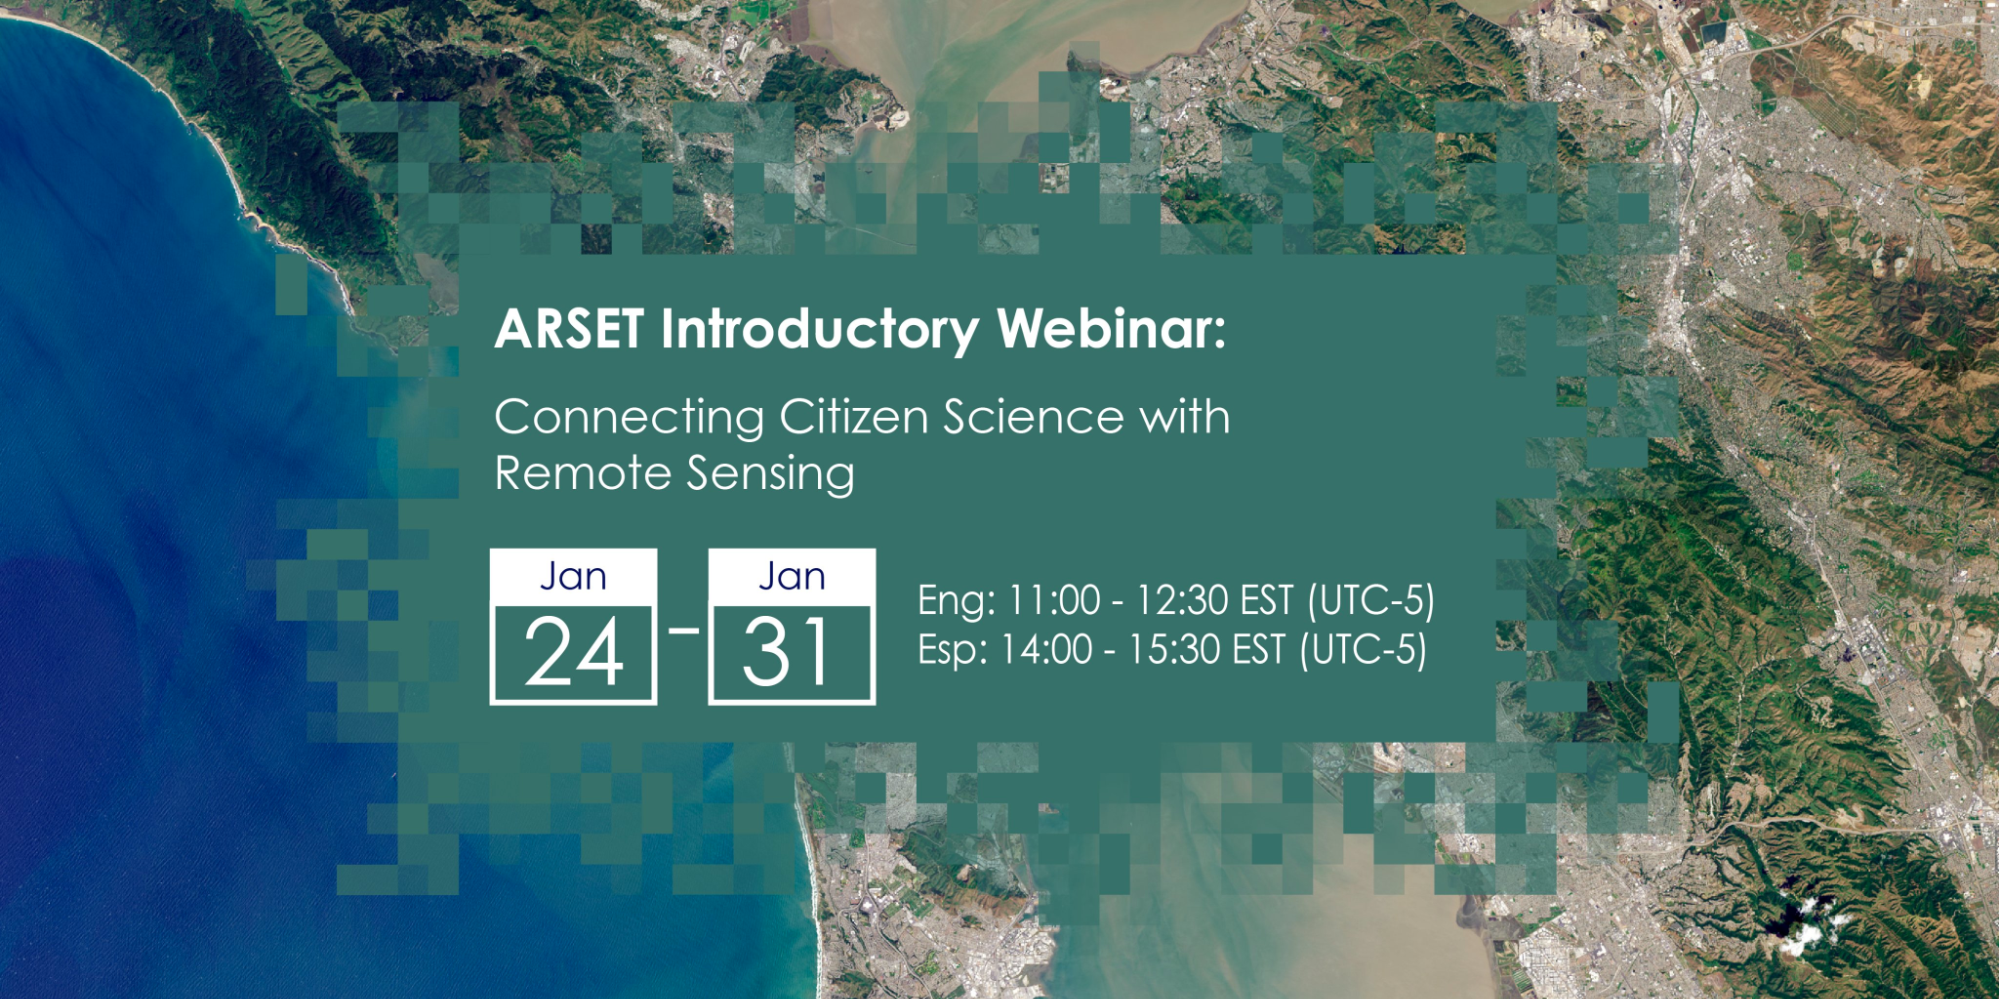 This graphic shows a satellite image of Earth, including both water and land, with text information in the center: ARSET Introductory Webinar: Connecting Citizen Science with Remote Sensing. January 24-31. English: 11 a.m. - 12:30 p.m. EST and Espagnol: 1400-1530 p.m. EST.